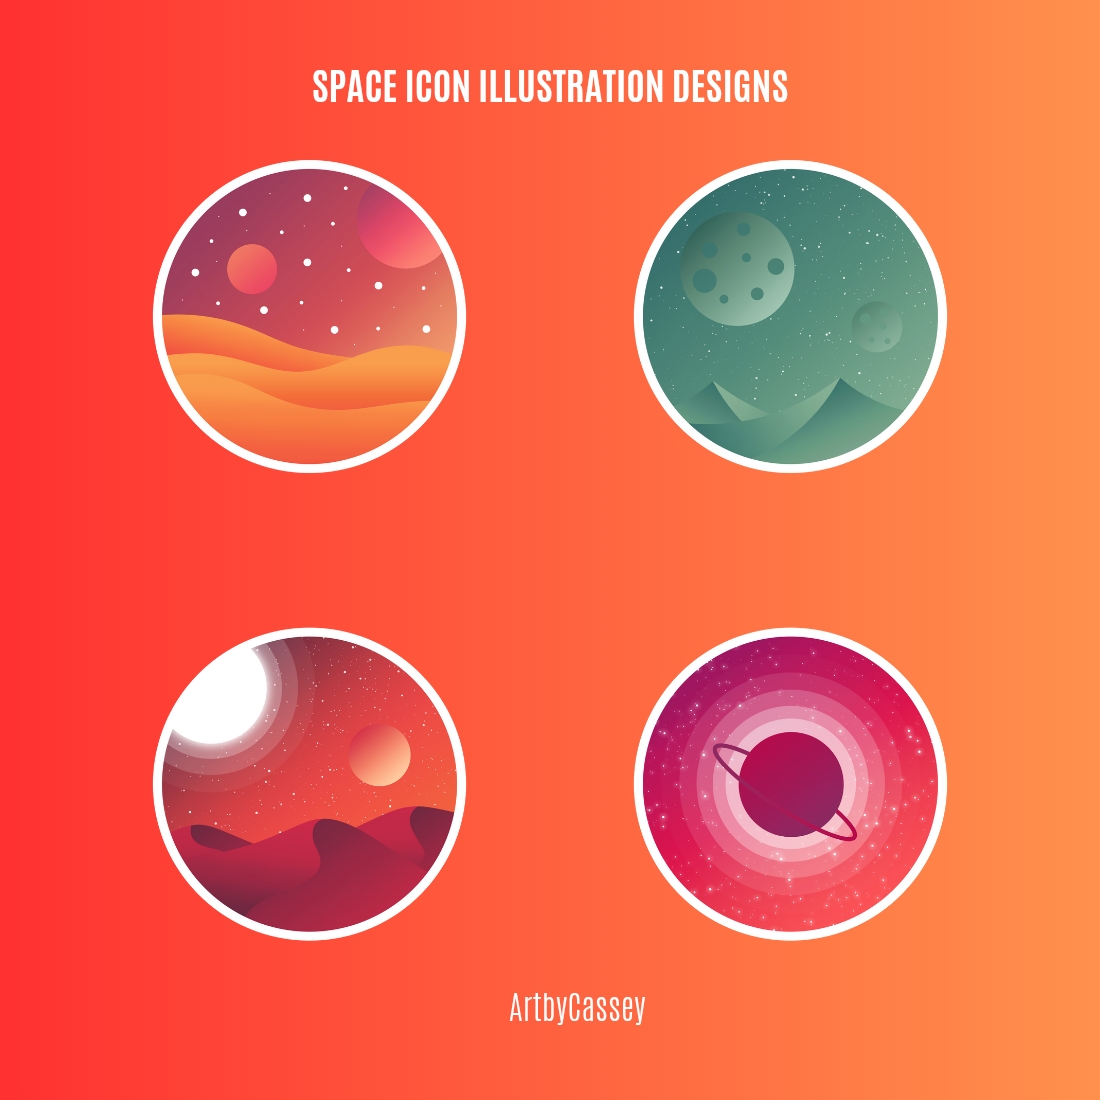 Space Icon Illustration Designs cover image.